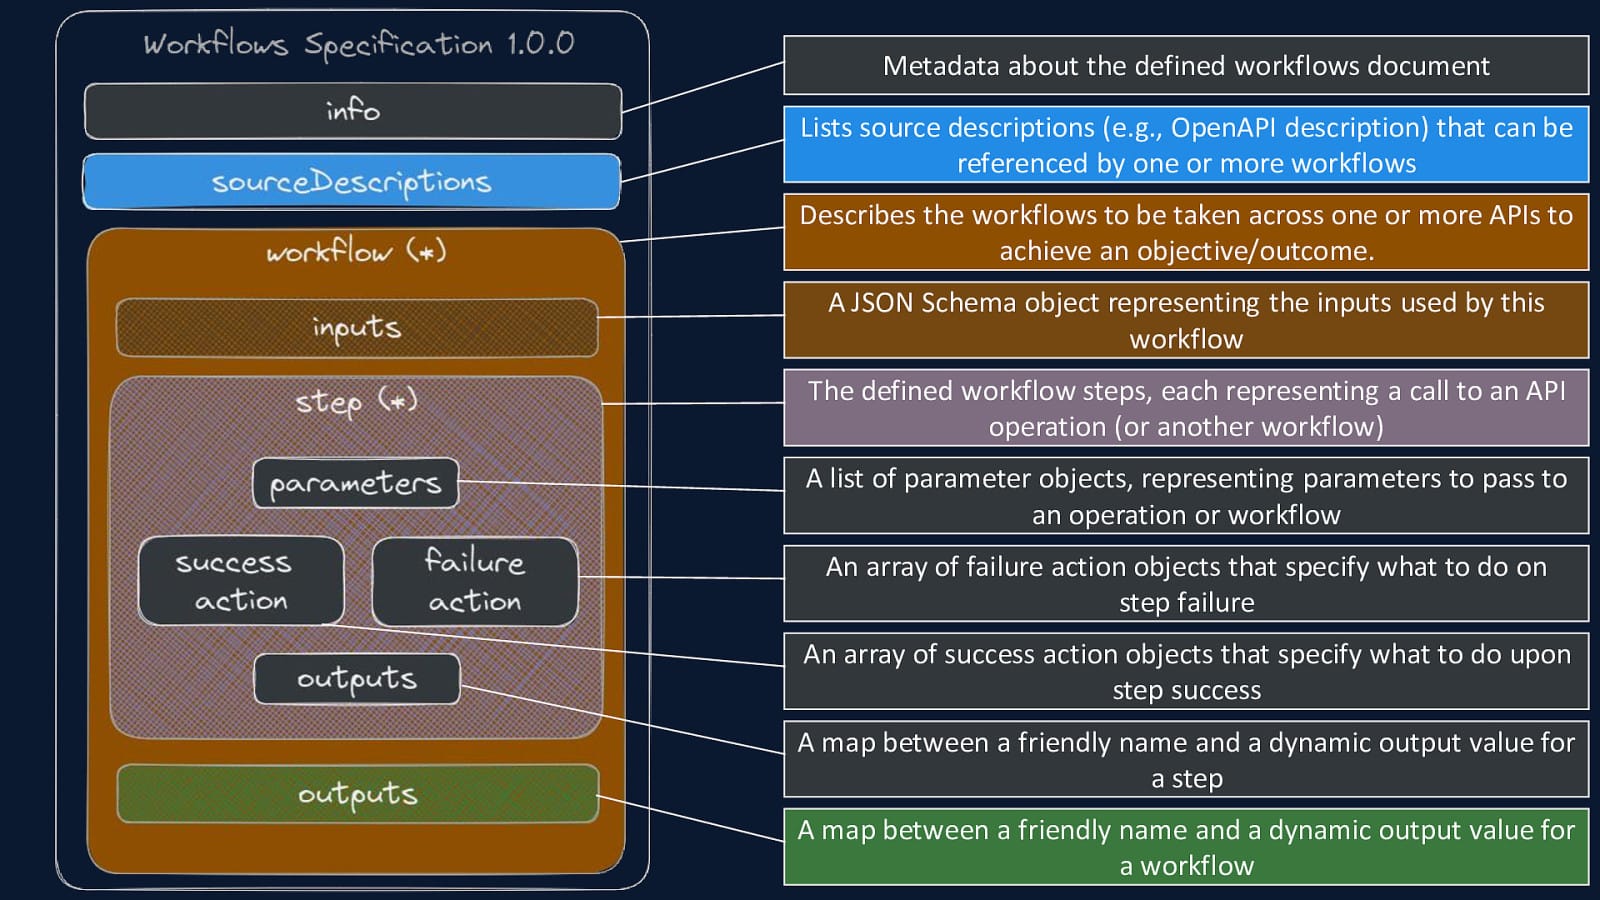 Diagram and description of the OpenAPI Workflow Specification 1.0.0